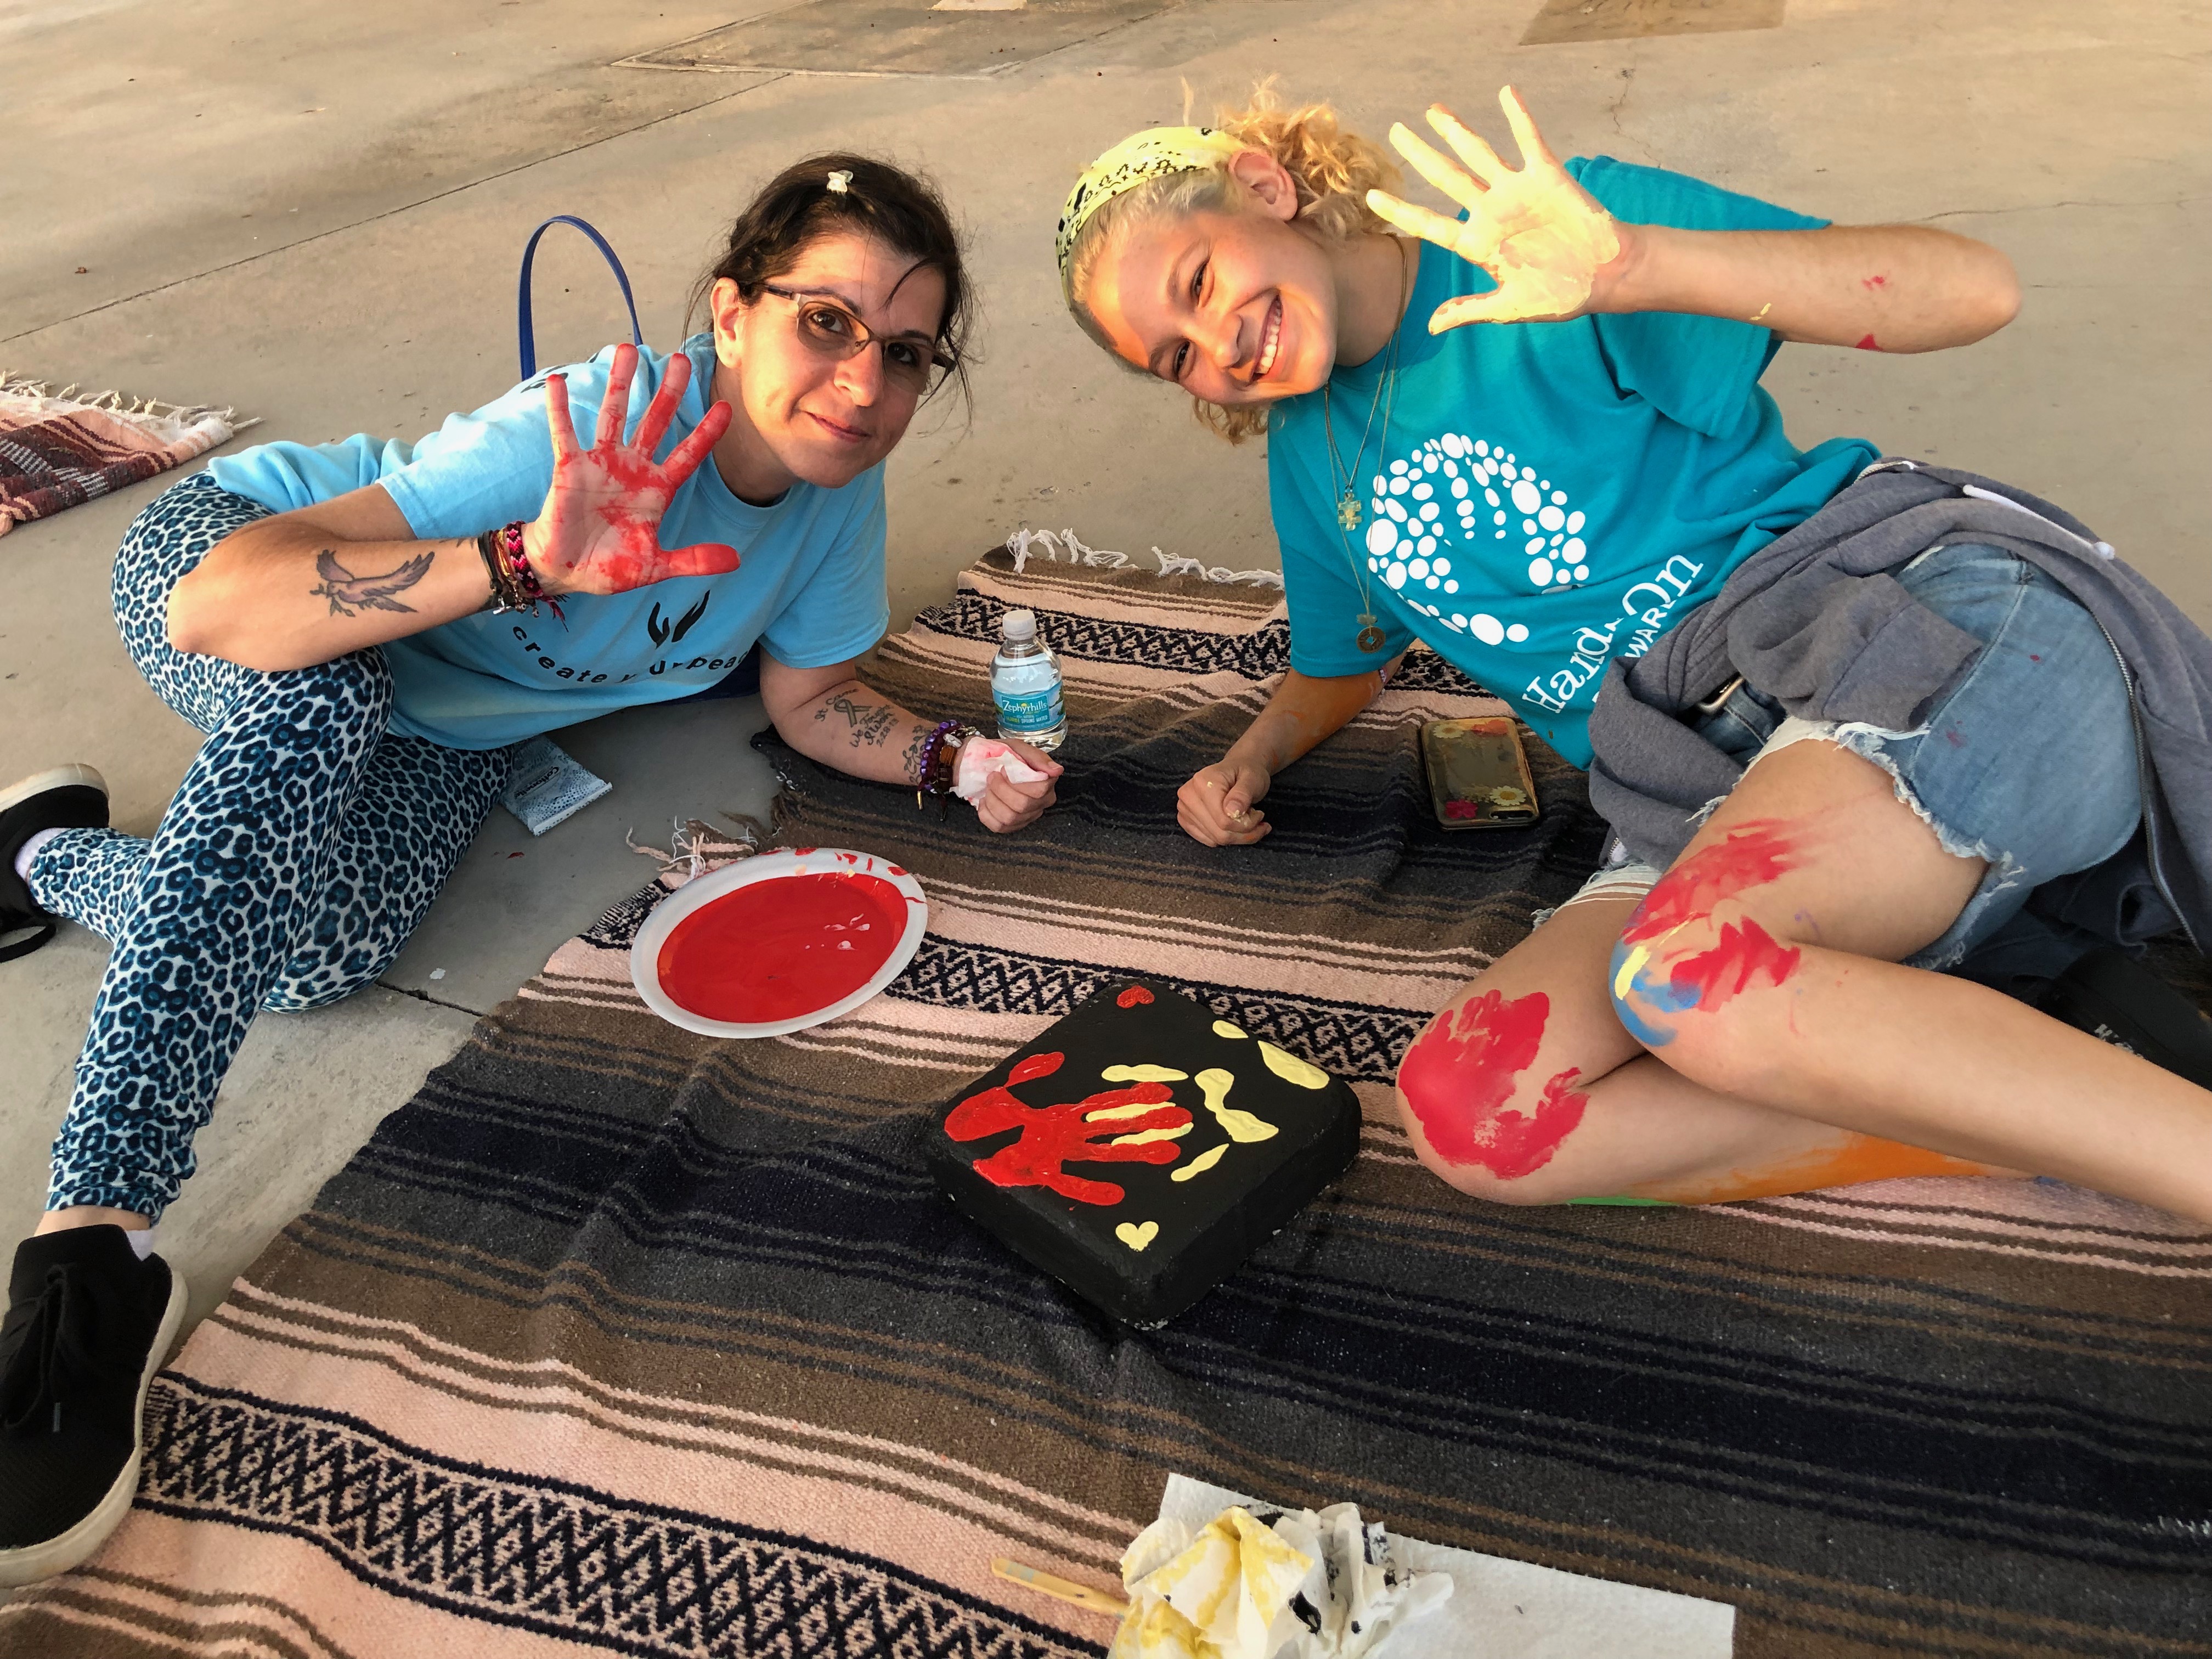 Stoneman Douglas teacher Ronit Reoven (left) and senior Tori Gonzalez (right) paint ceramic tiles for Project Grow Love, a garden memorial they built outside the school. (Courtesy of Ronit Reoven)